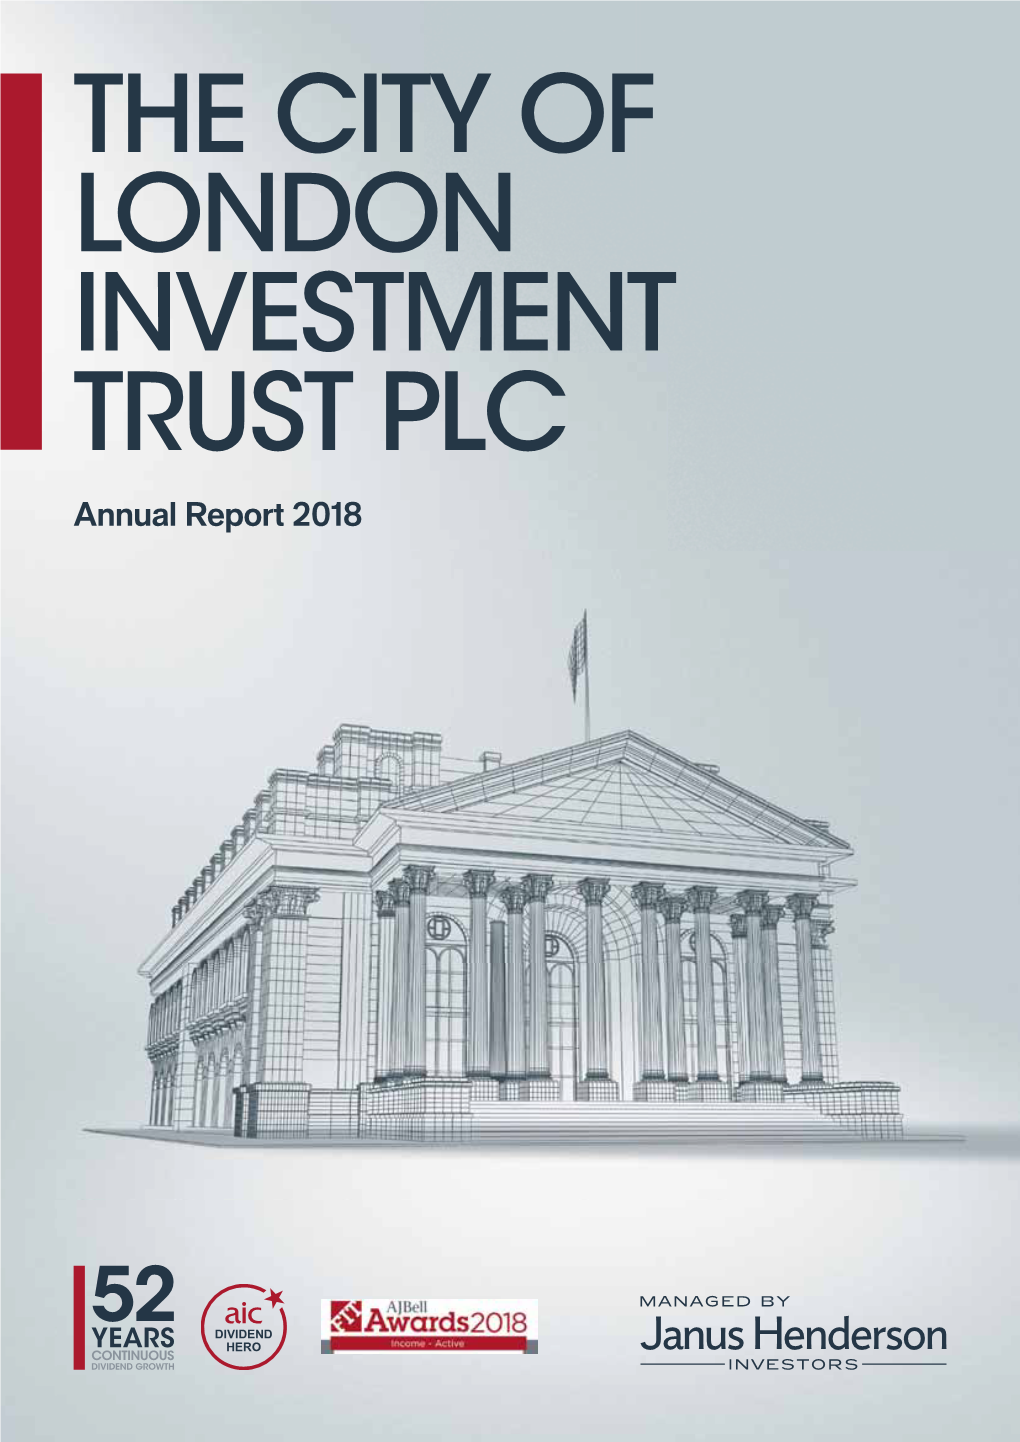 The City of London Investment Trust